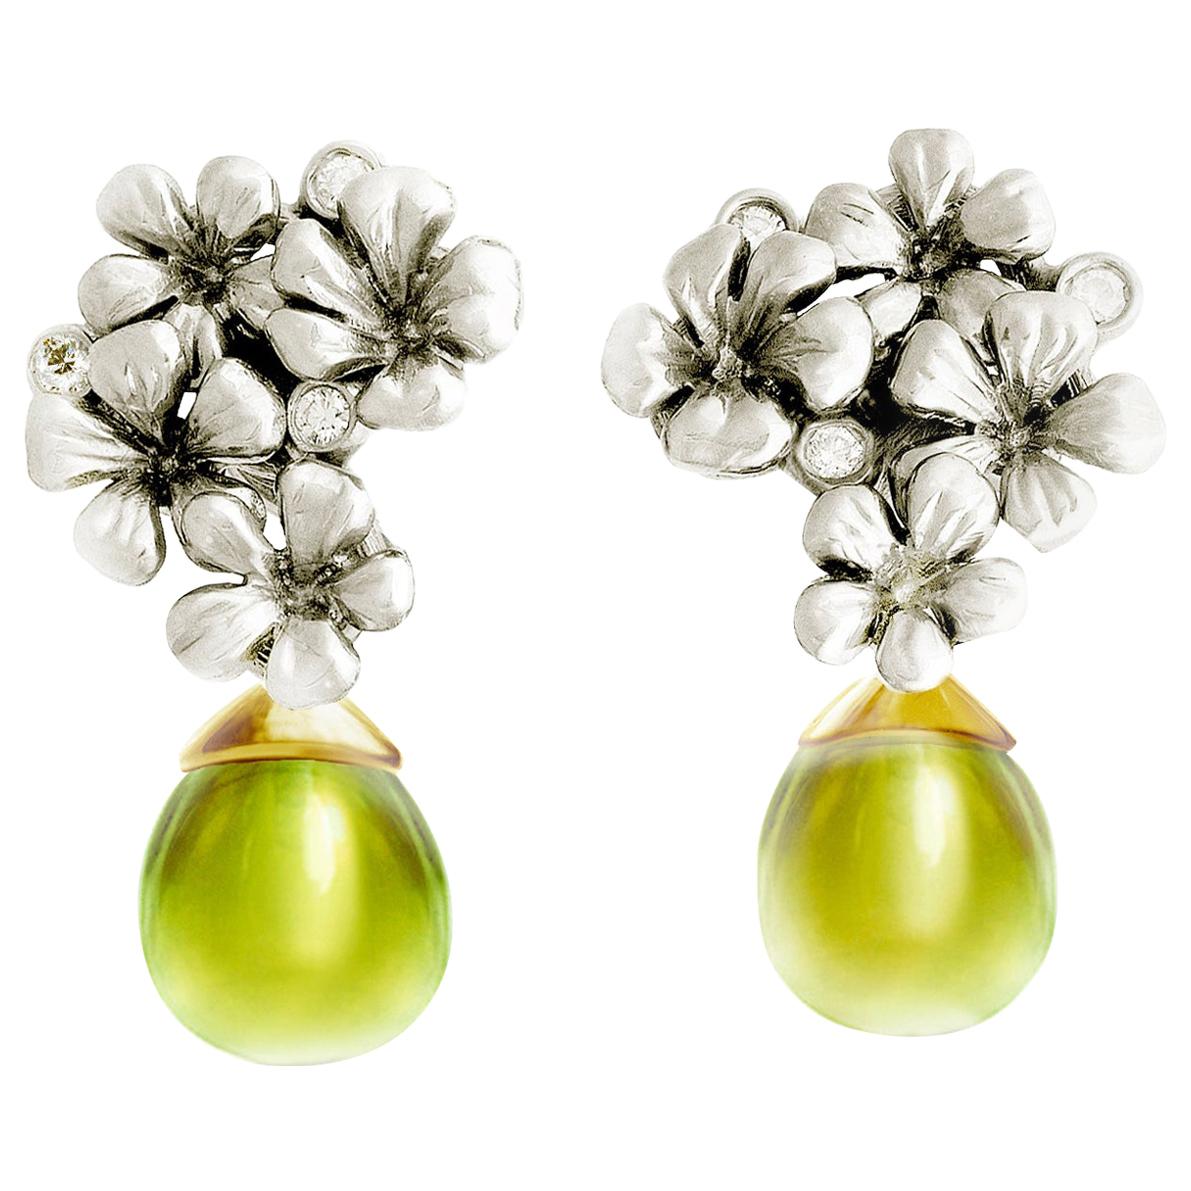 14 Karat White Gold Flowers Clip-On Earrings by The Artist with Diamonds